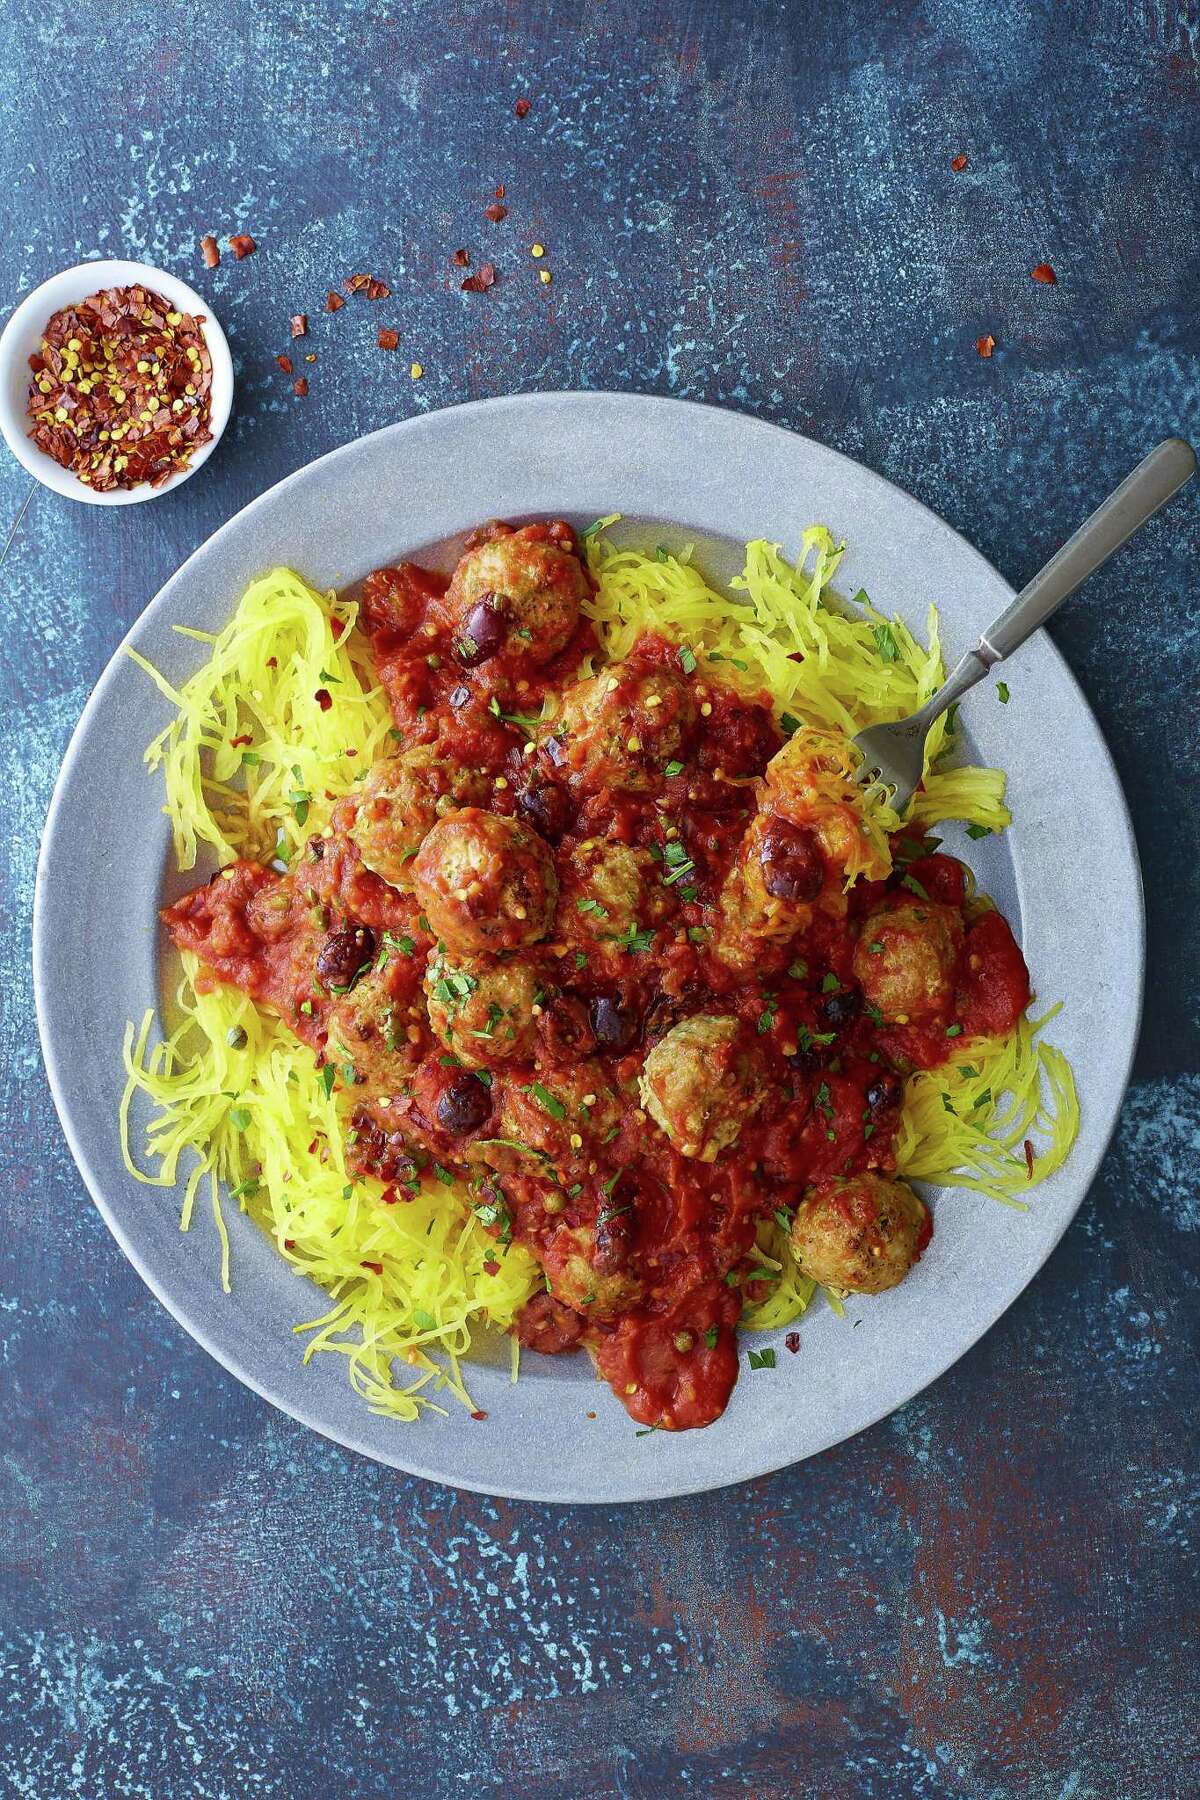 Spaghetti Squash Meatballs from “Fit Men Cook” by Kevin Curry